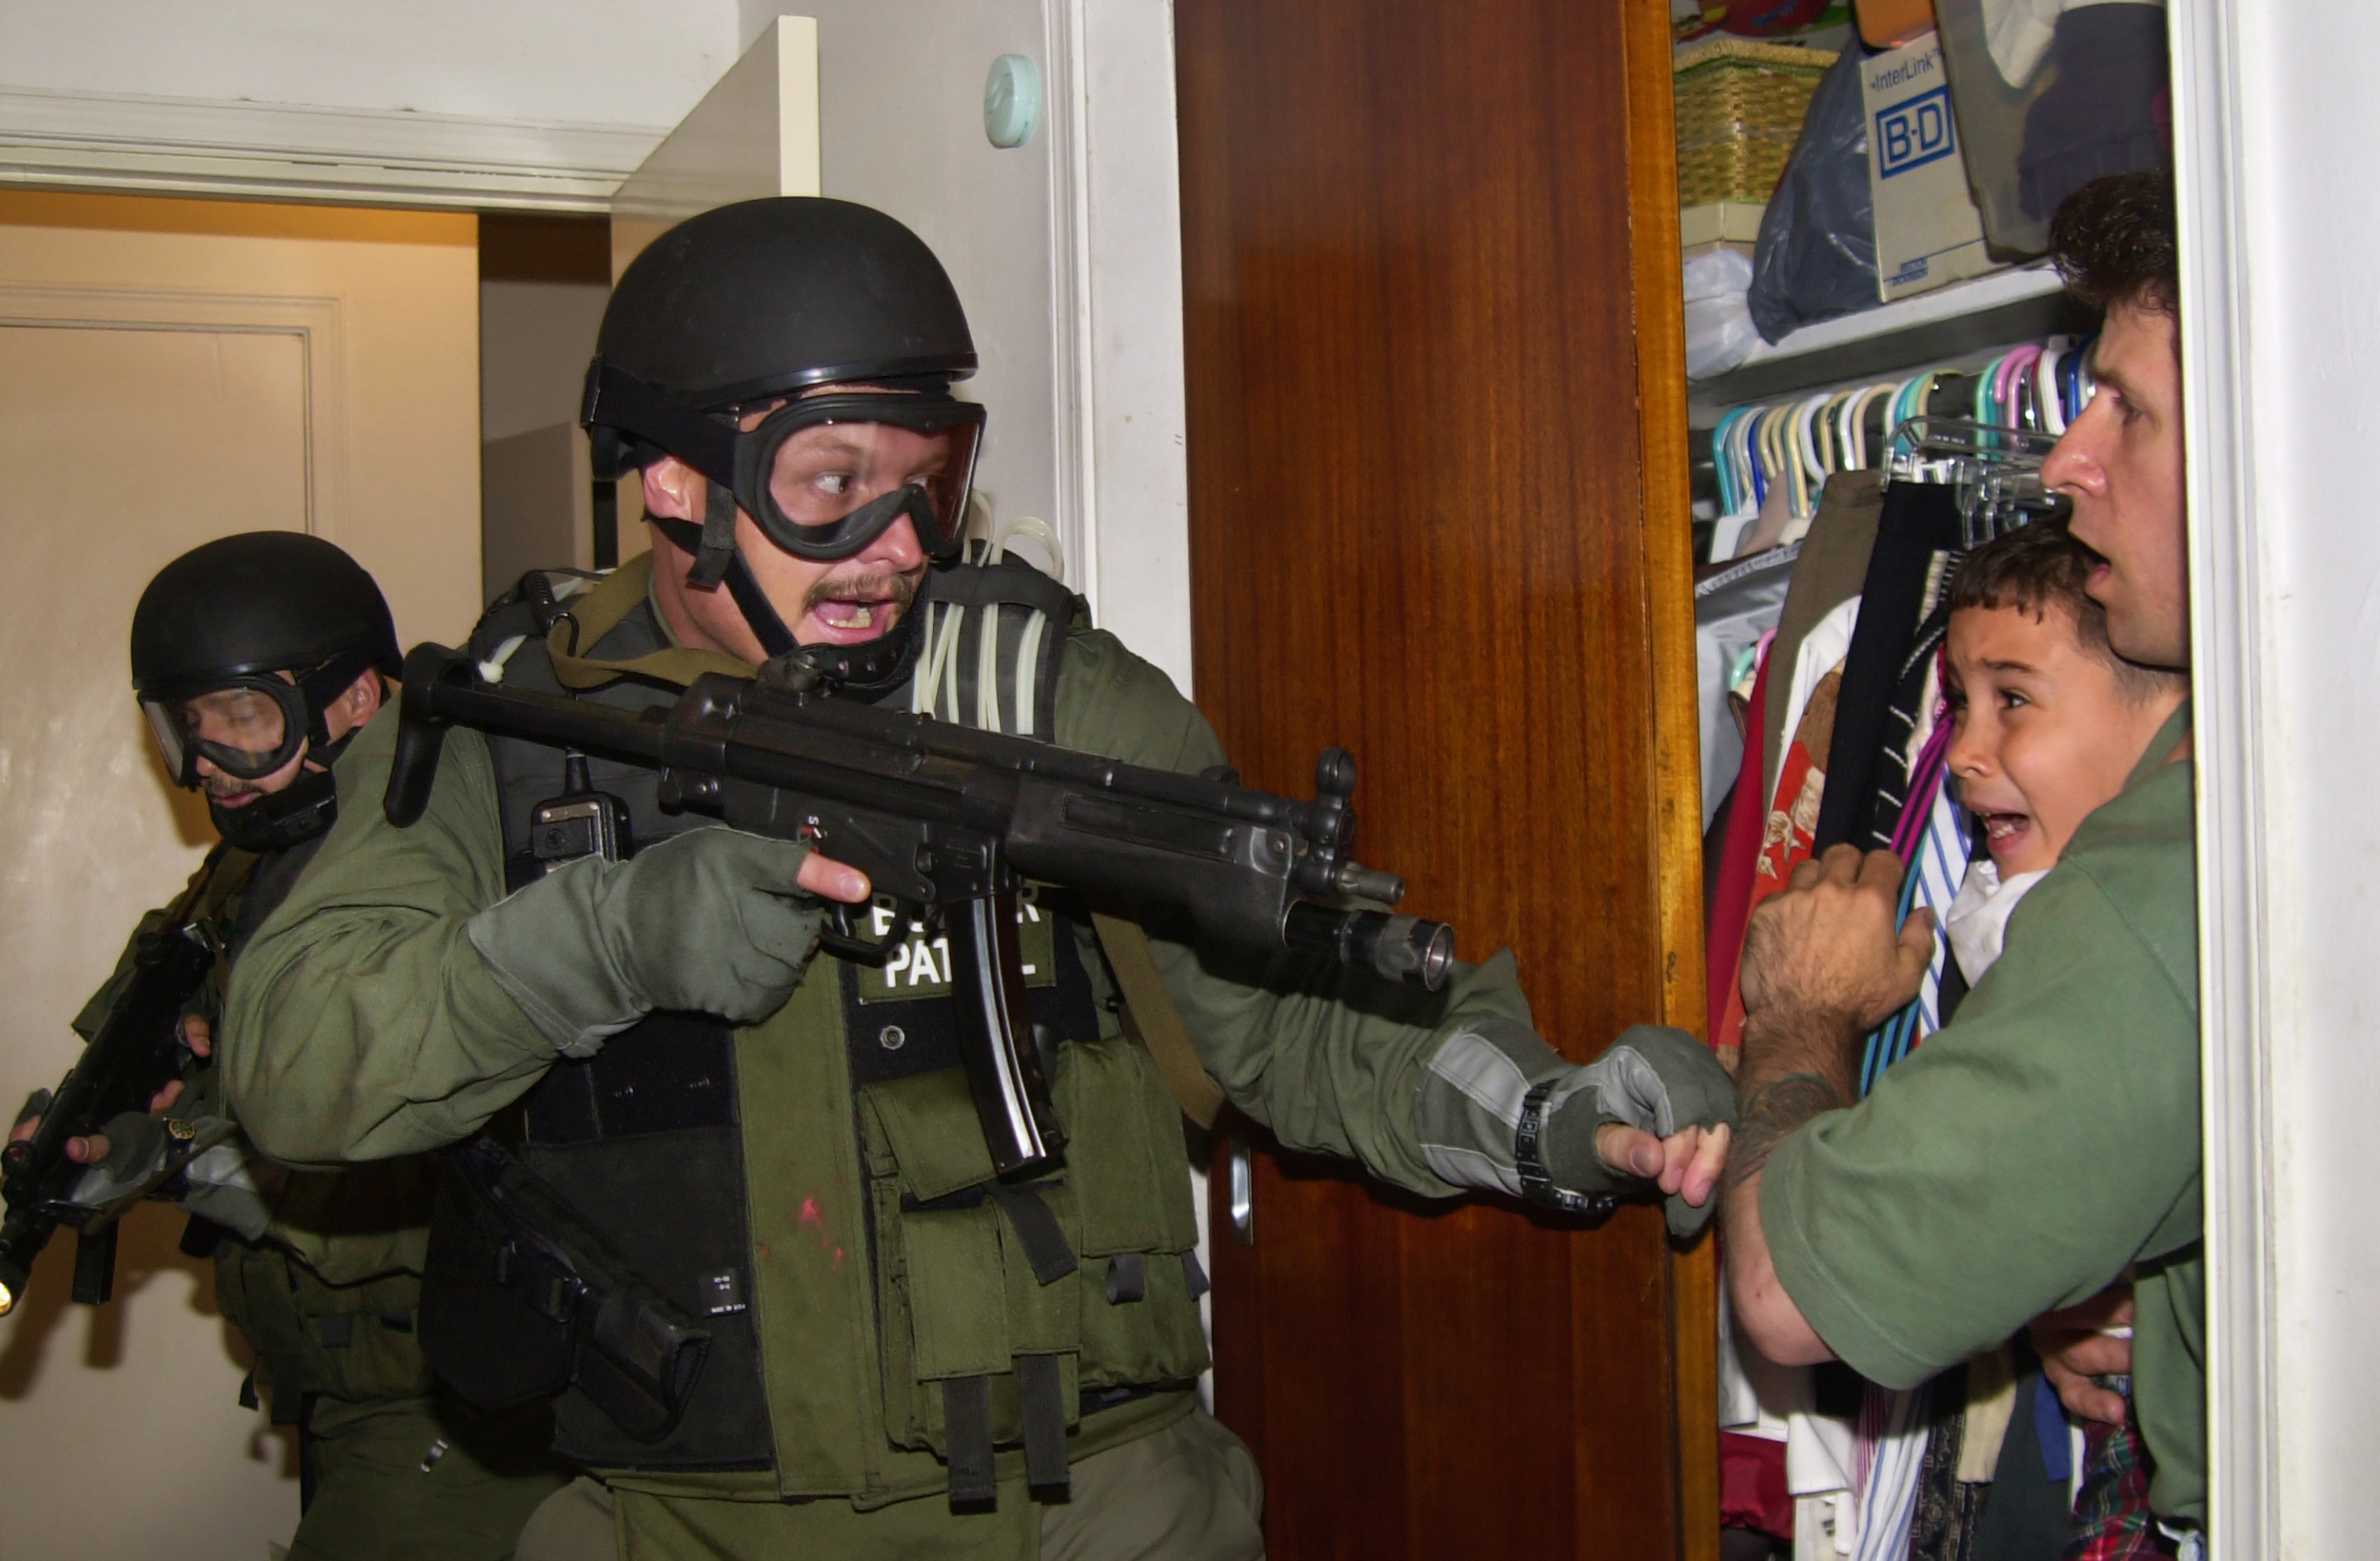 Armed federal agents enter the bedroom of a home in Miami's Little Havana on April 22, 2000, as 6-year-old Elian Gonzalez is held in a closet by Donato Dalrymple, one of the two men who rescued the boy from the ocean months earlier. The agents took custody of Elian at the home of his Miami relatives, eventually repatriating him to Cuba with his father. (AP Photo/Alan Diaz)